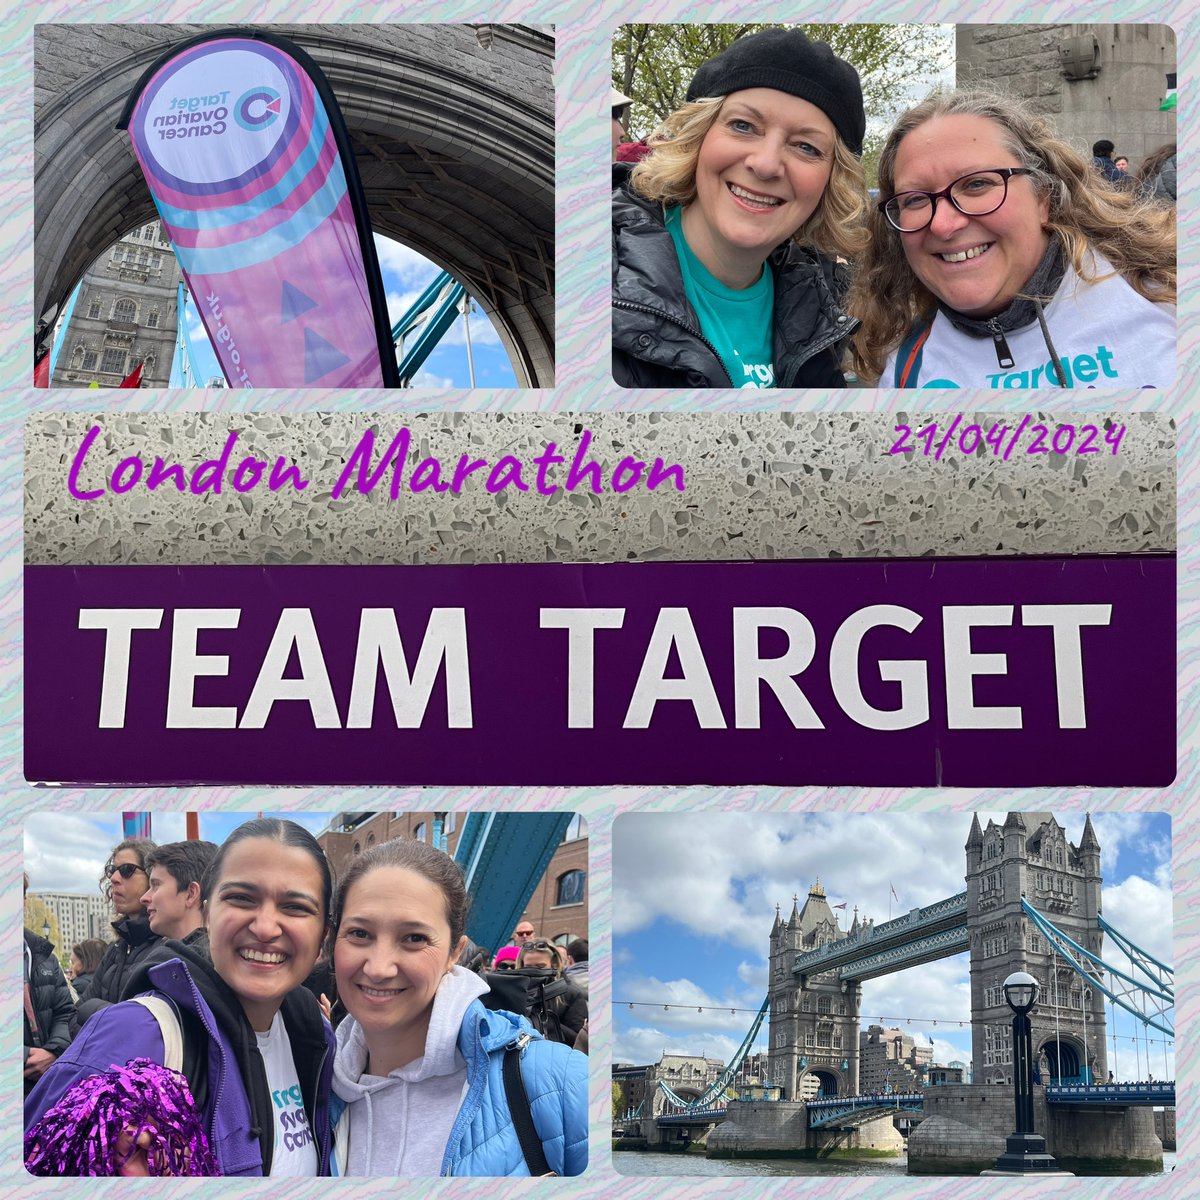 Congratulations to all the runners in the @londonmarathon Great to see charities supporting their runners on Tower Bridge. A beautiful location & an amazing atmosphere. Loved cheering everyone, especially those running to raise awareness and funds for @TargetOvarian 
#TeamTarget